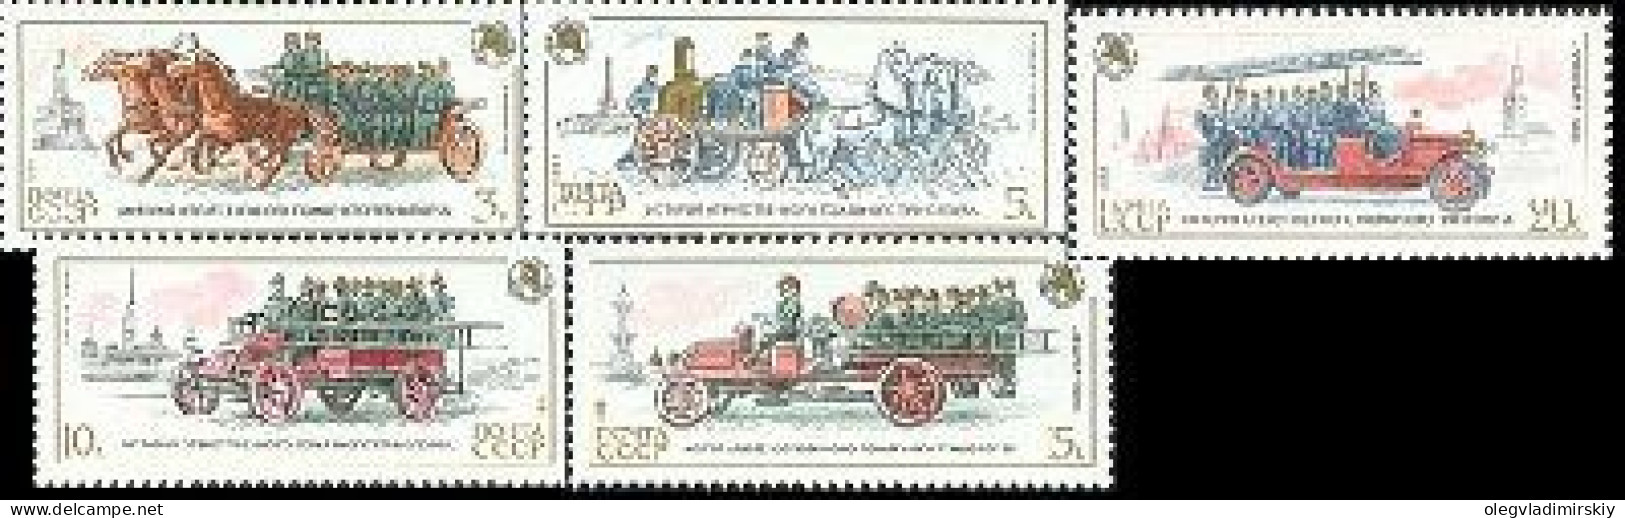 USSR Russia 1984 History Of Fire Engines Set Of 5 Stamps Mint - Camion